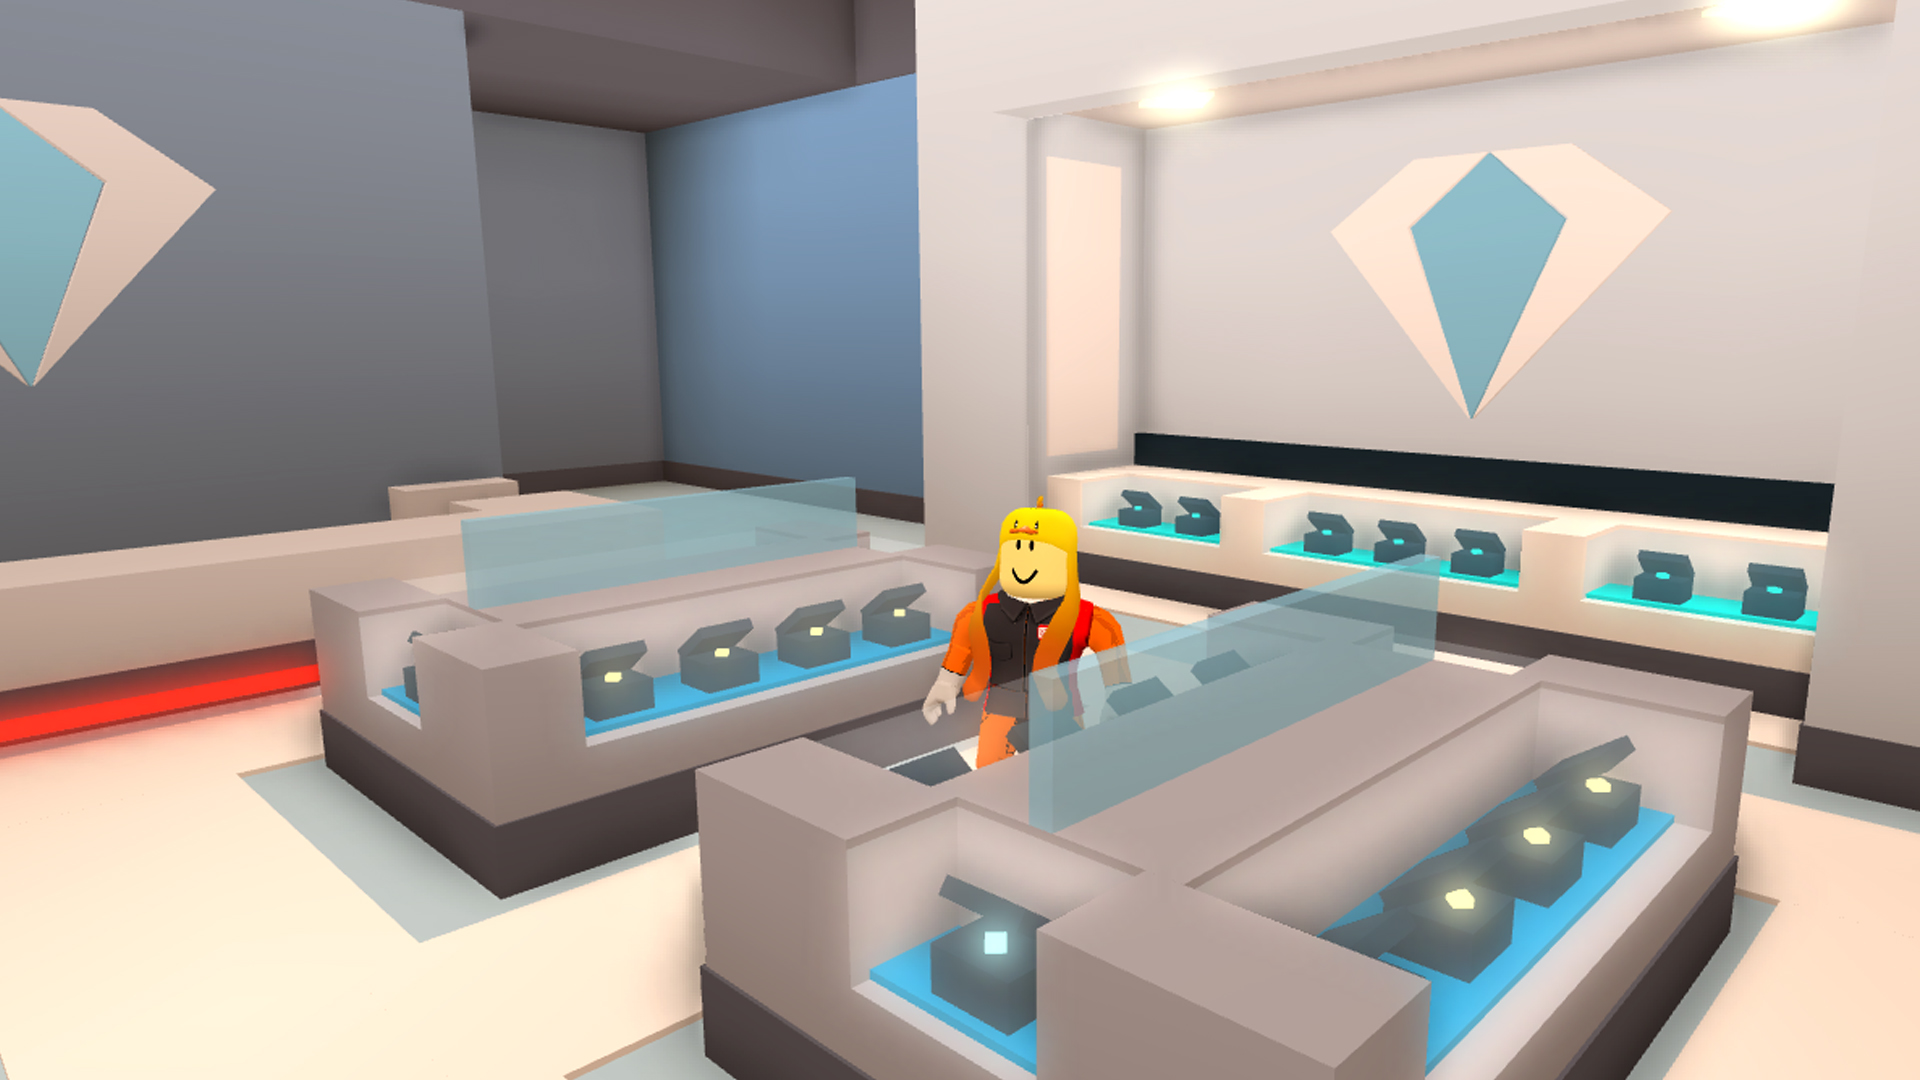 What Time Does The Jewelry Store Open In Jailbreak Roblox